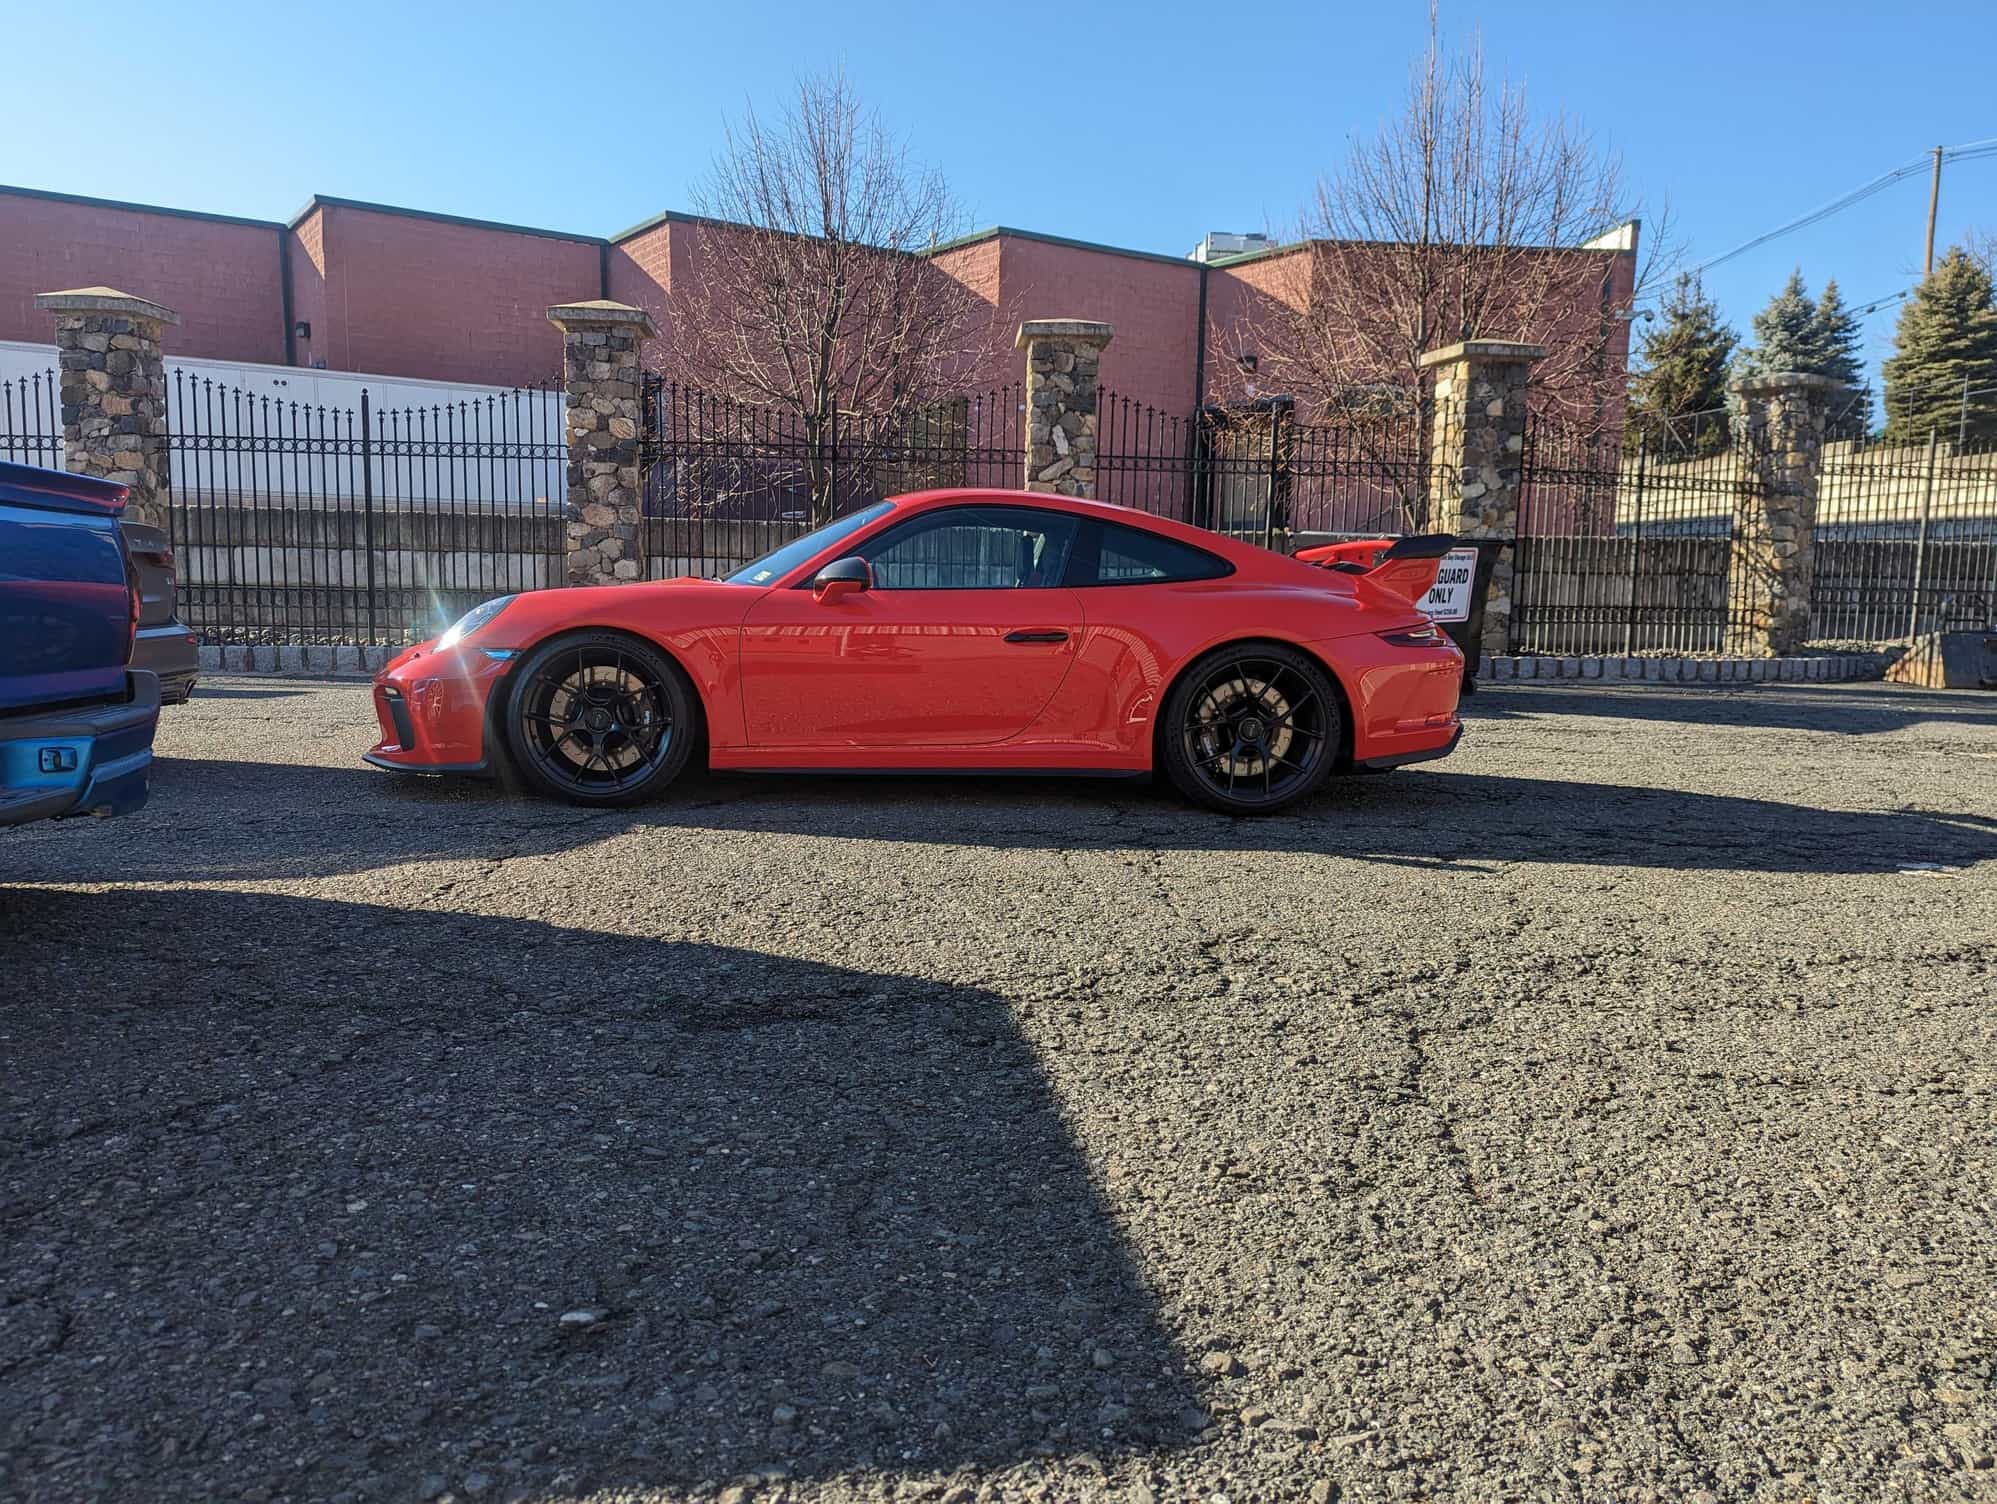 Wheels and Tires/Axles - Satin Black BBS FI-R / TPMS / Cup 2s - 991 and 991.2 GT3 Fitment (non-RS) - Used - 2015 to 2019 Porsche GT3 - Bethesda, MD 20817, United States